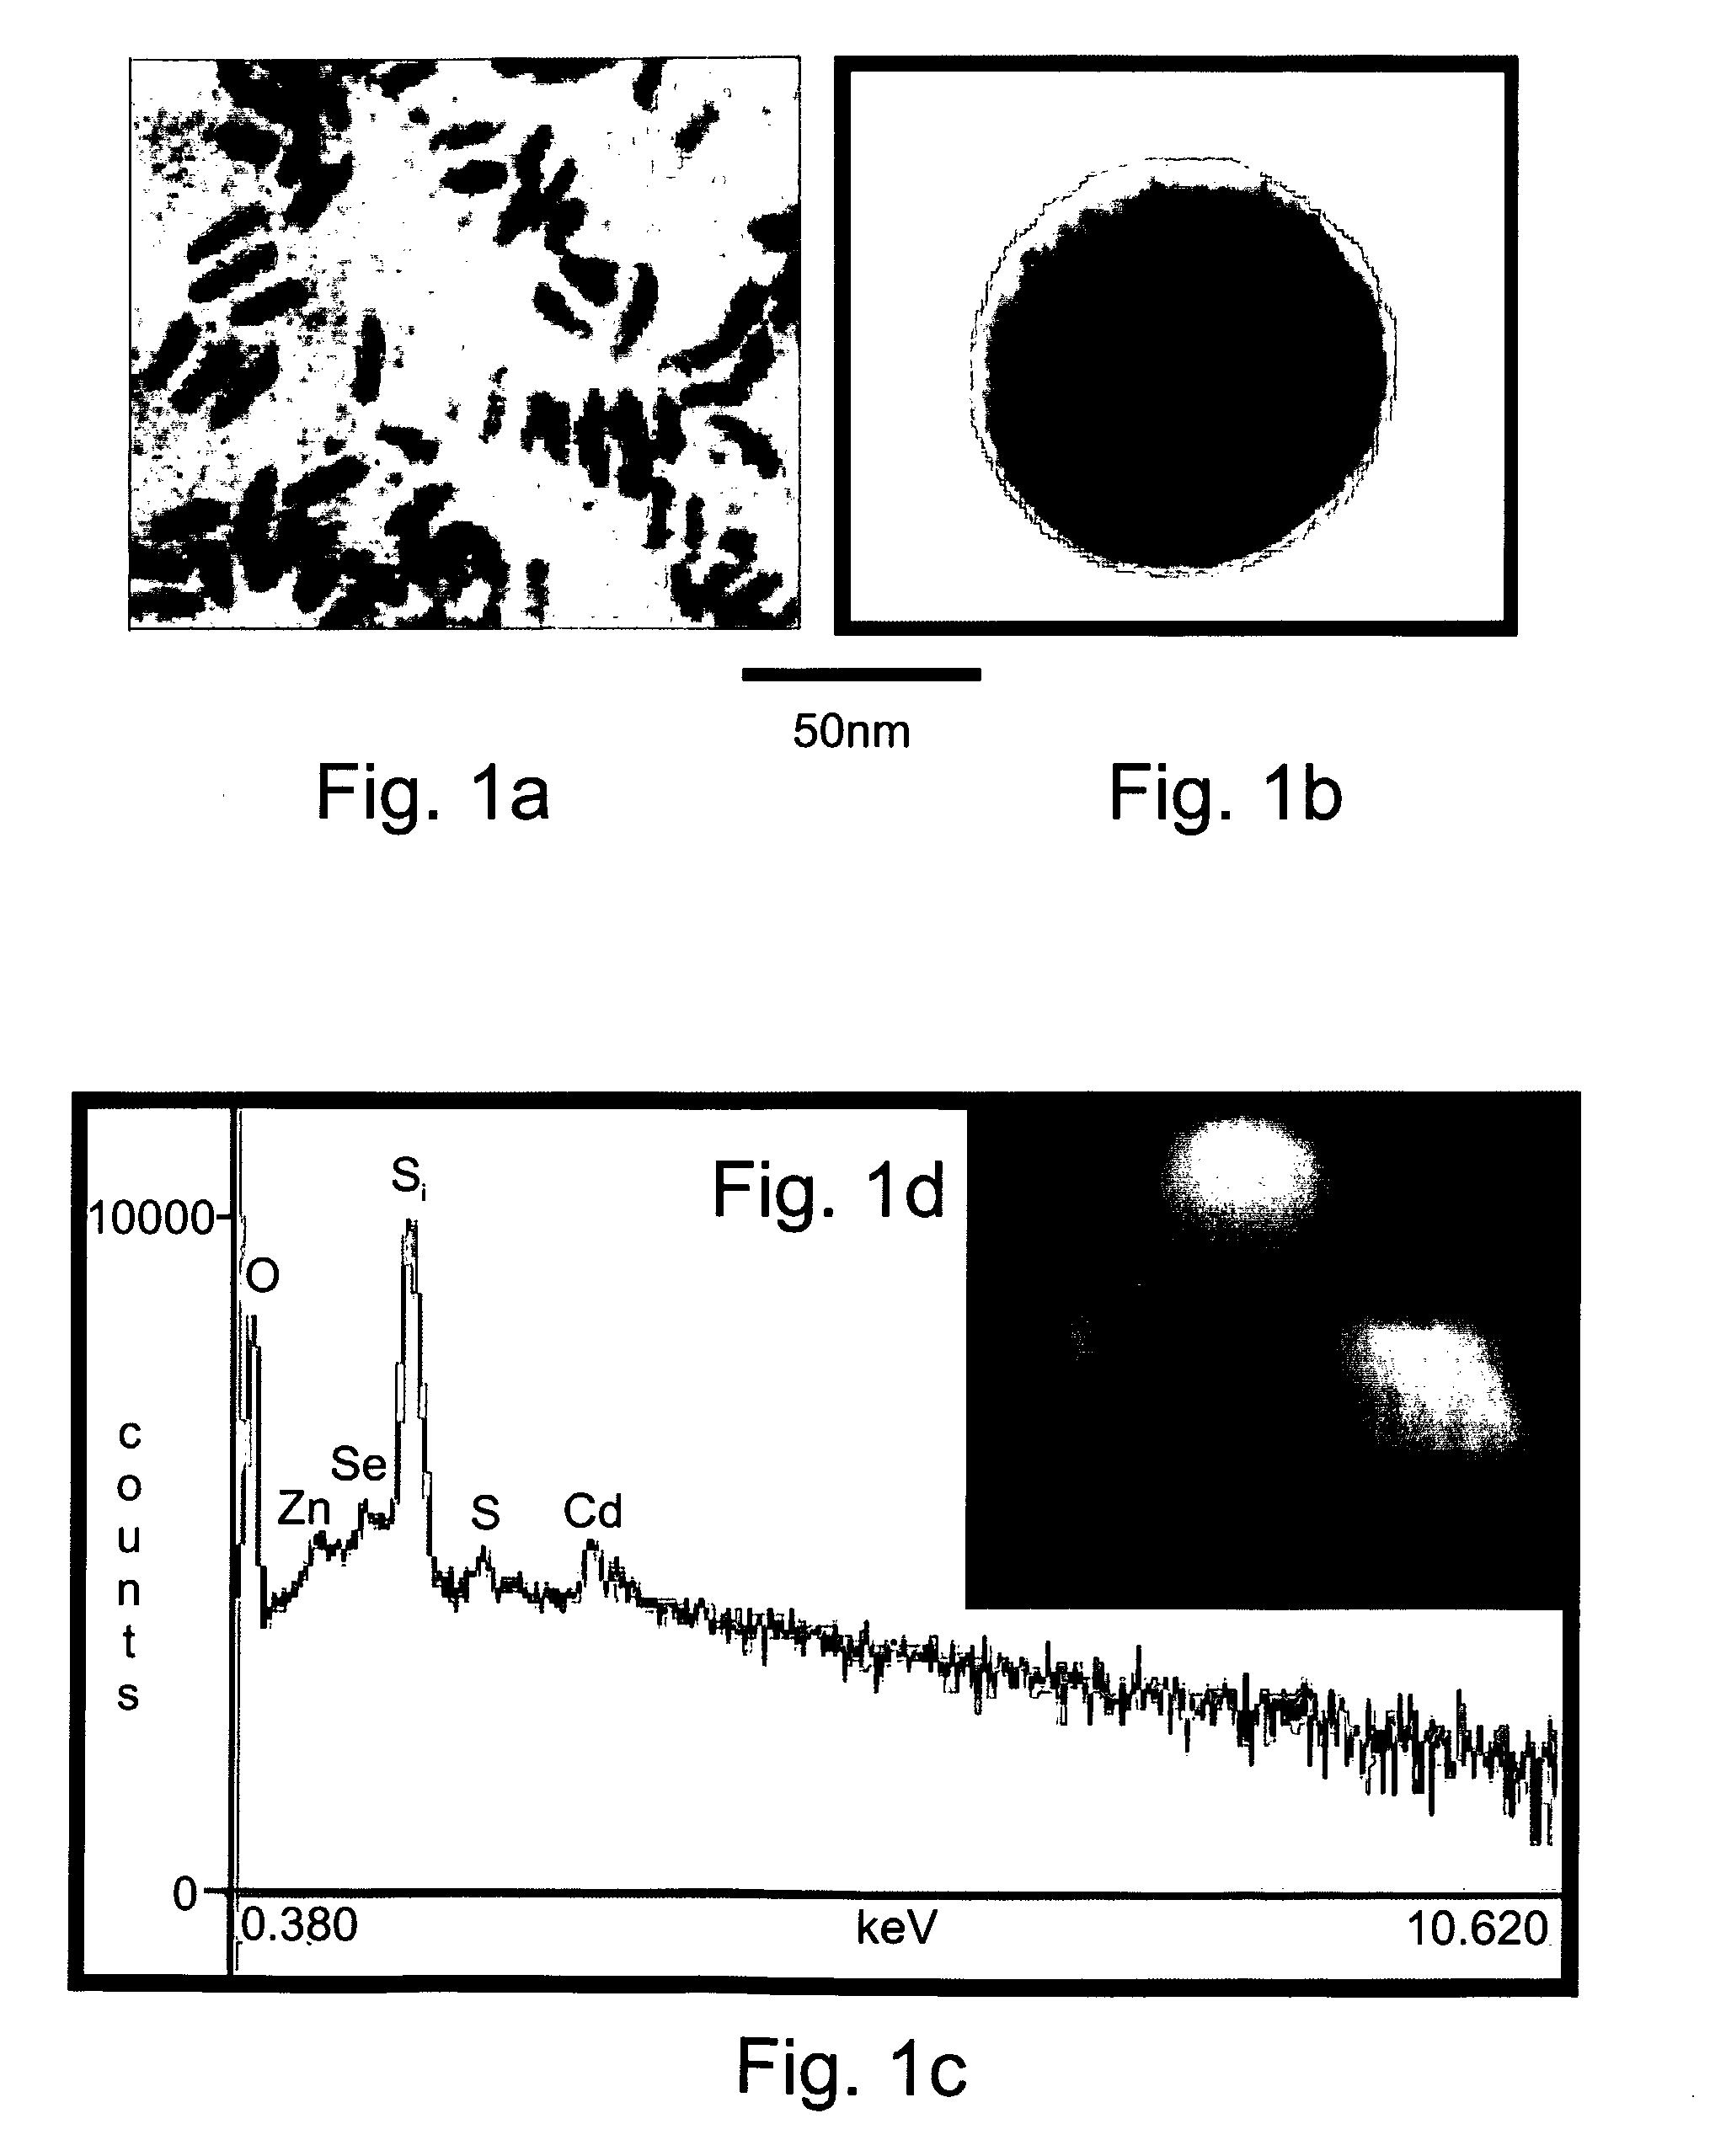 Spherical composites entrapping nanoparticles, processes of preparing same and uses thereof